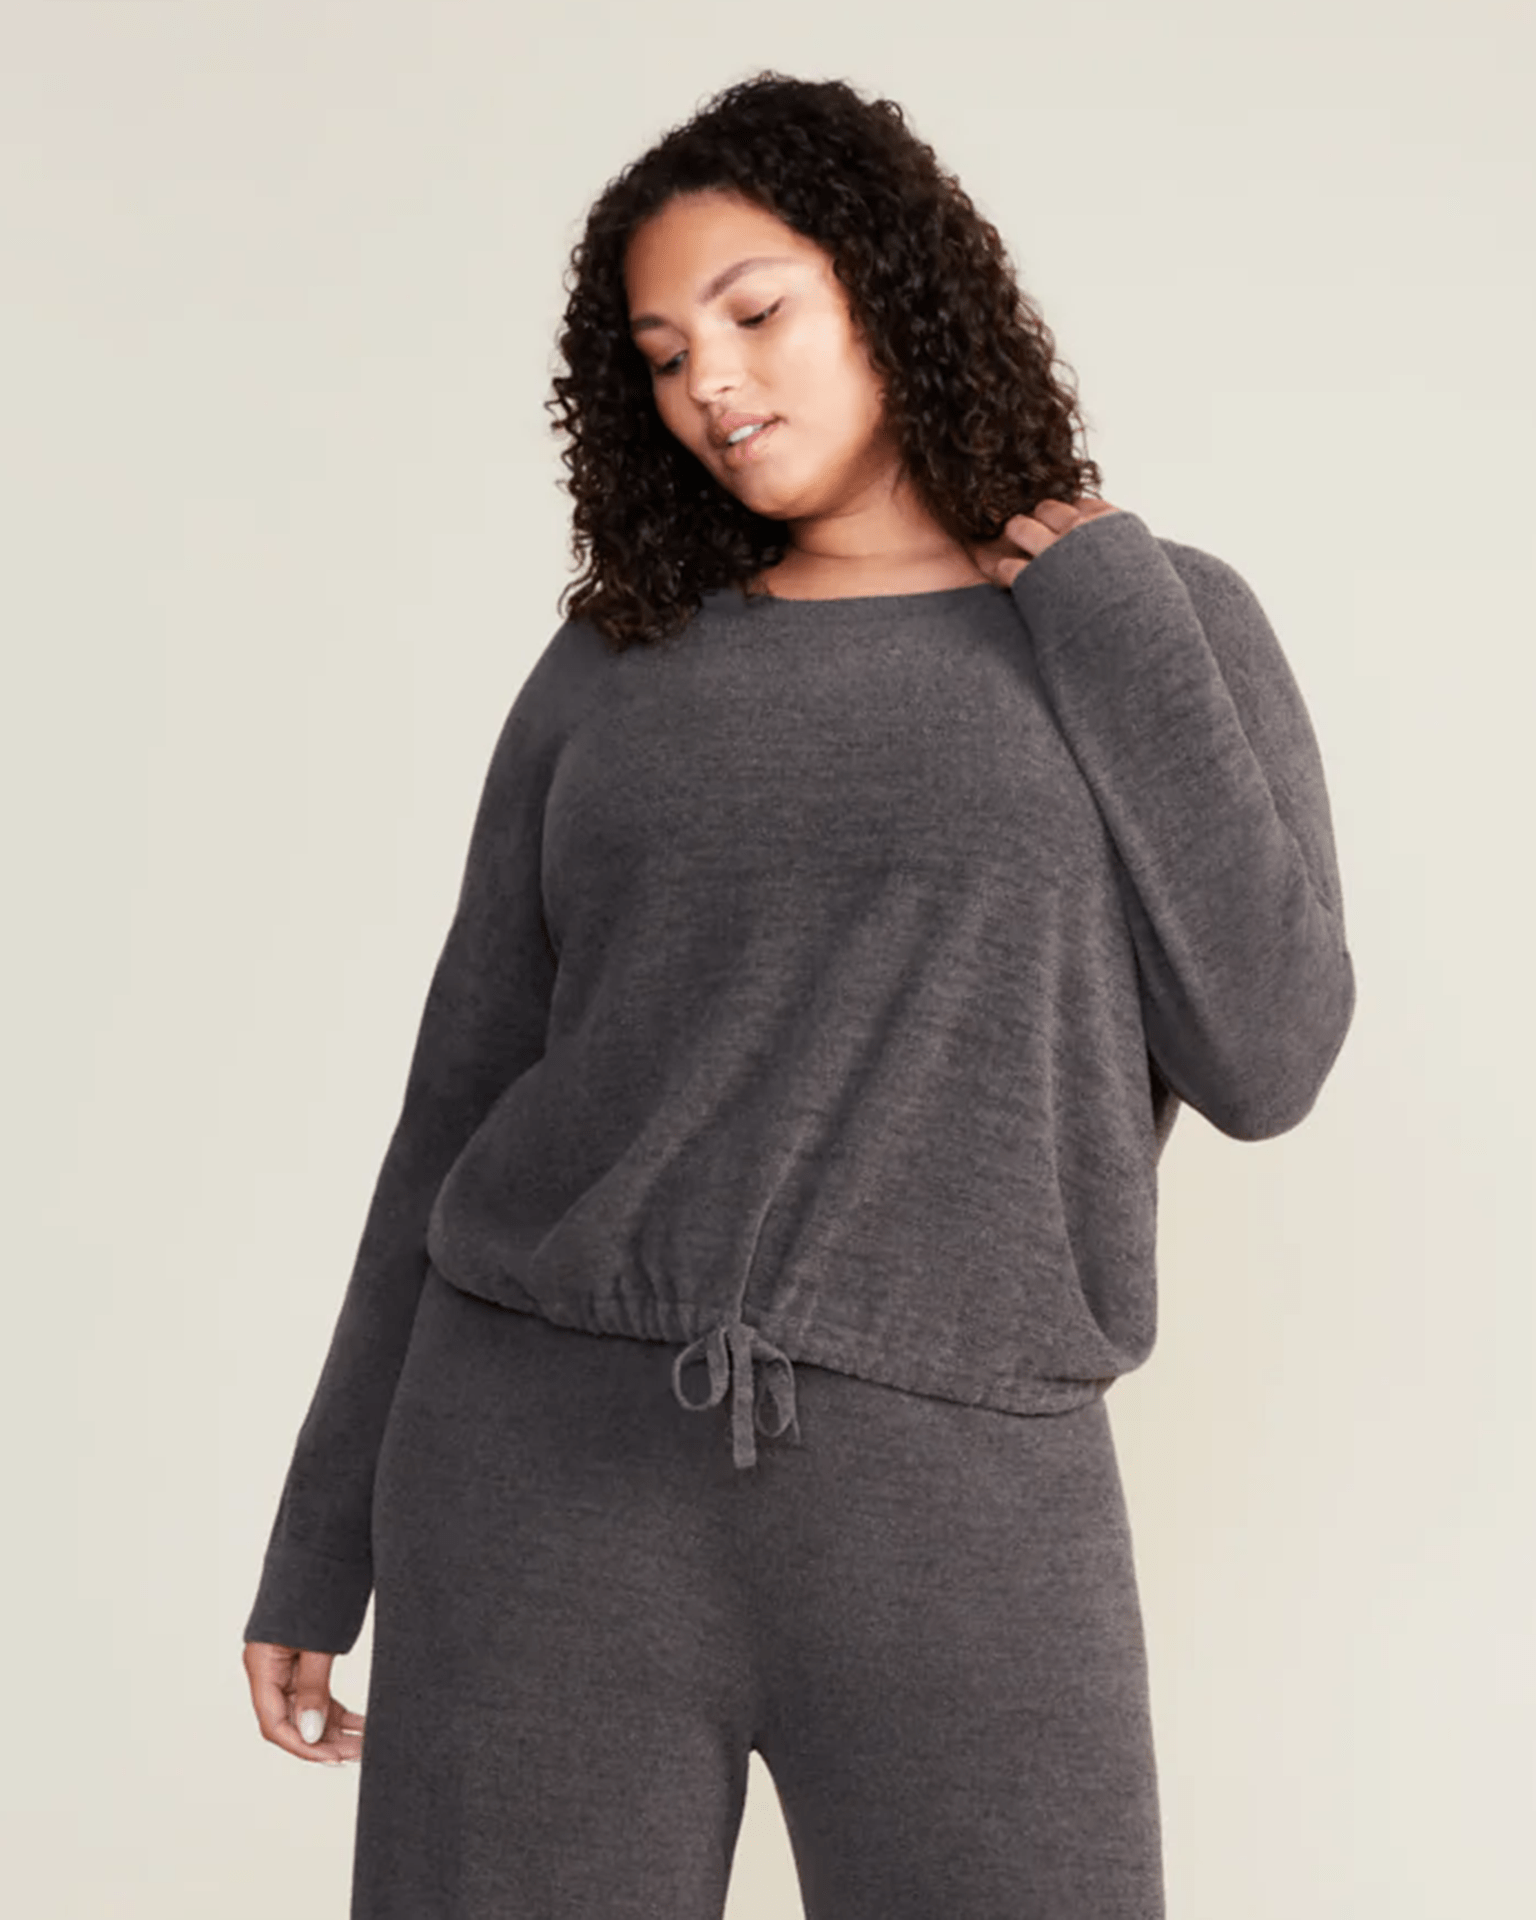 CCUL Slouchy Pullover in Carbon